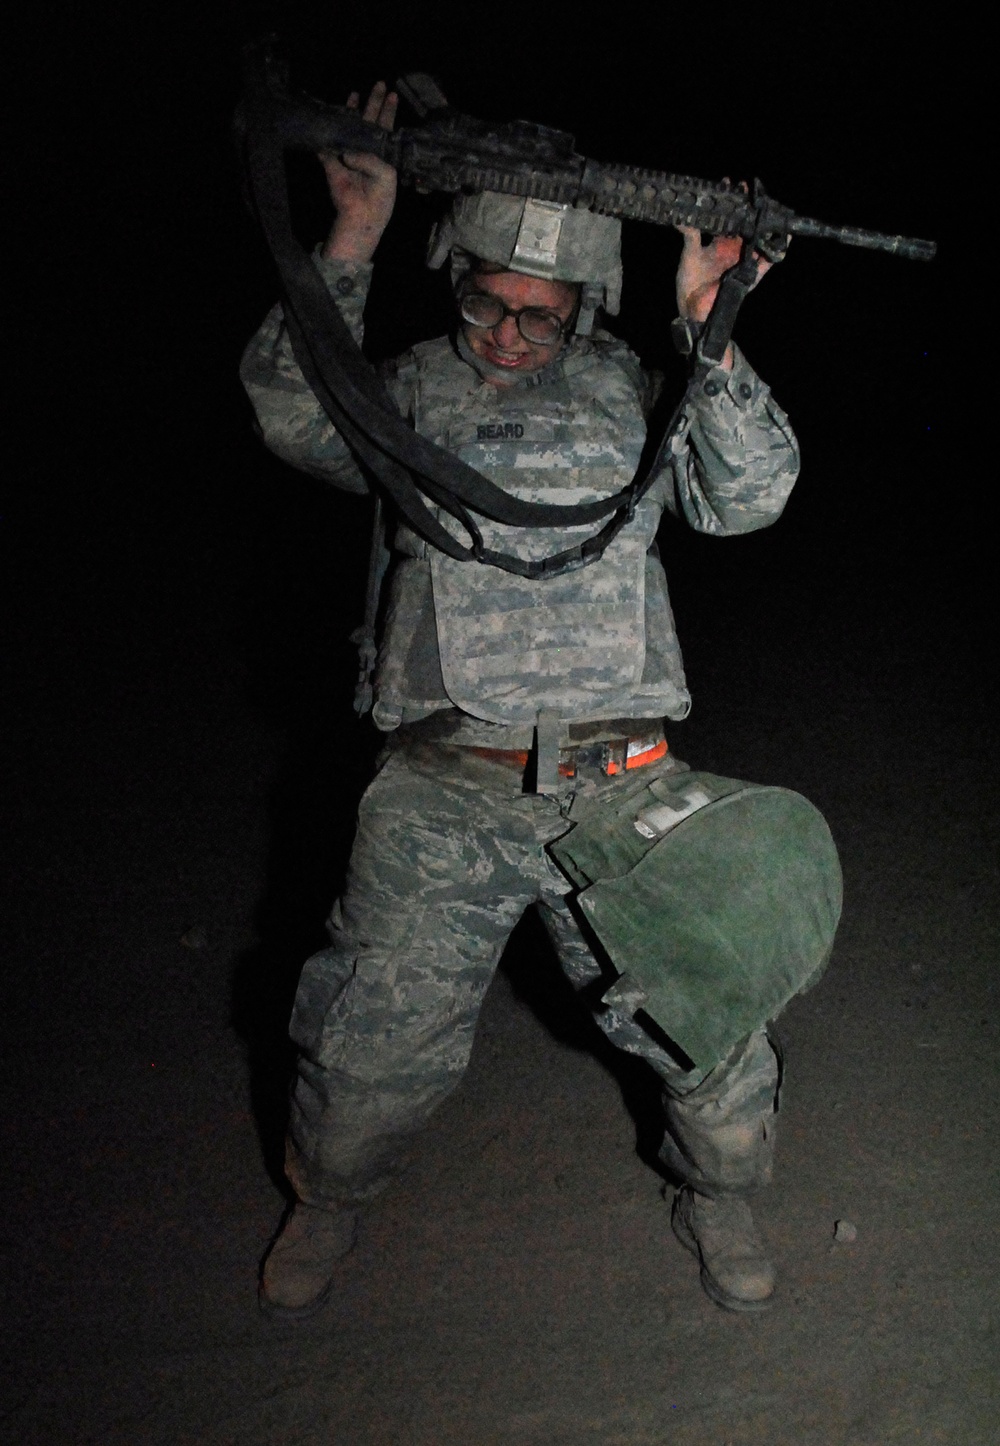 Airman marches, low-crawls and sweats her way into history: Part three